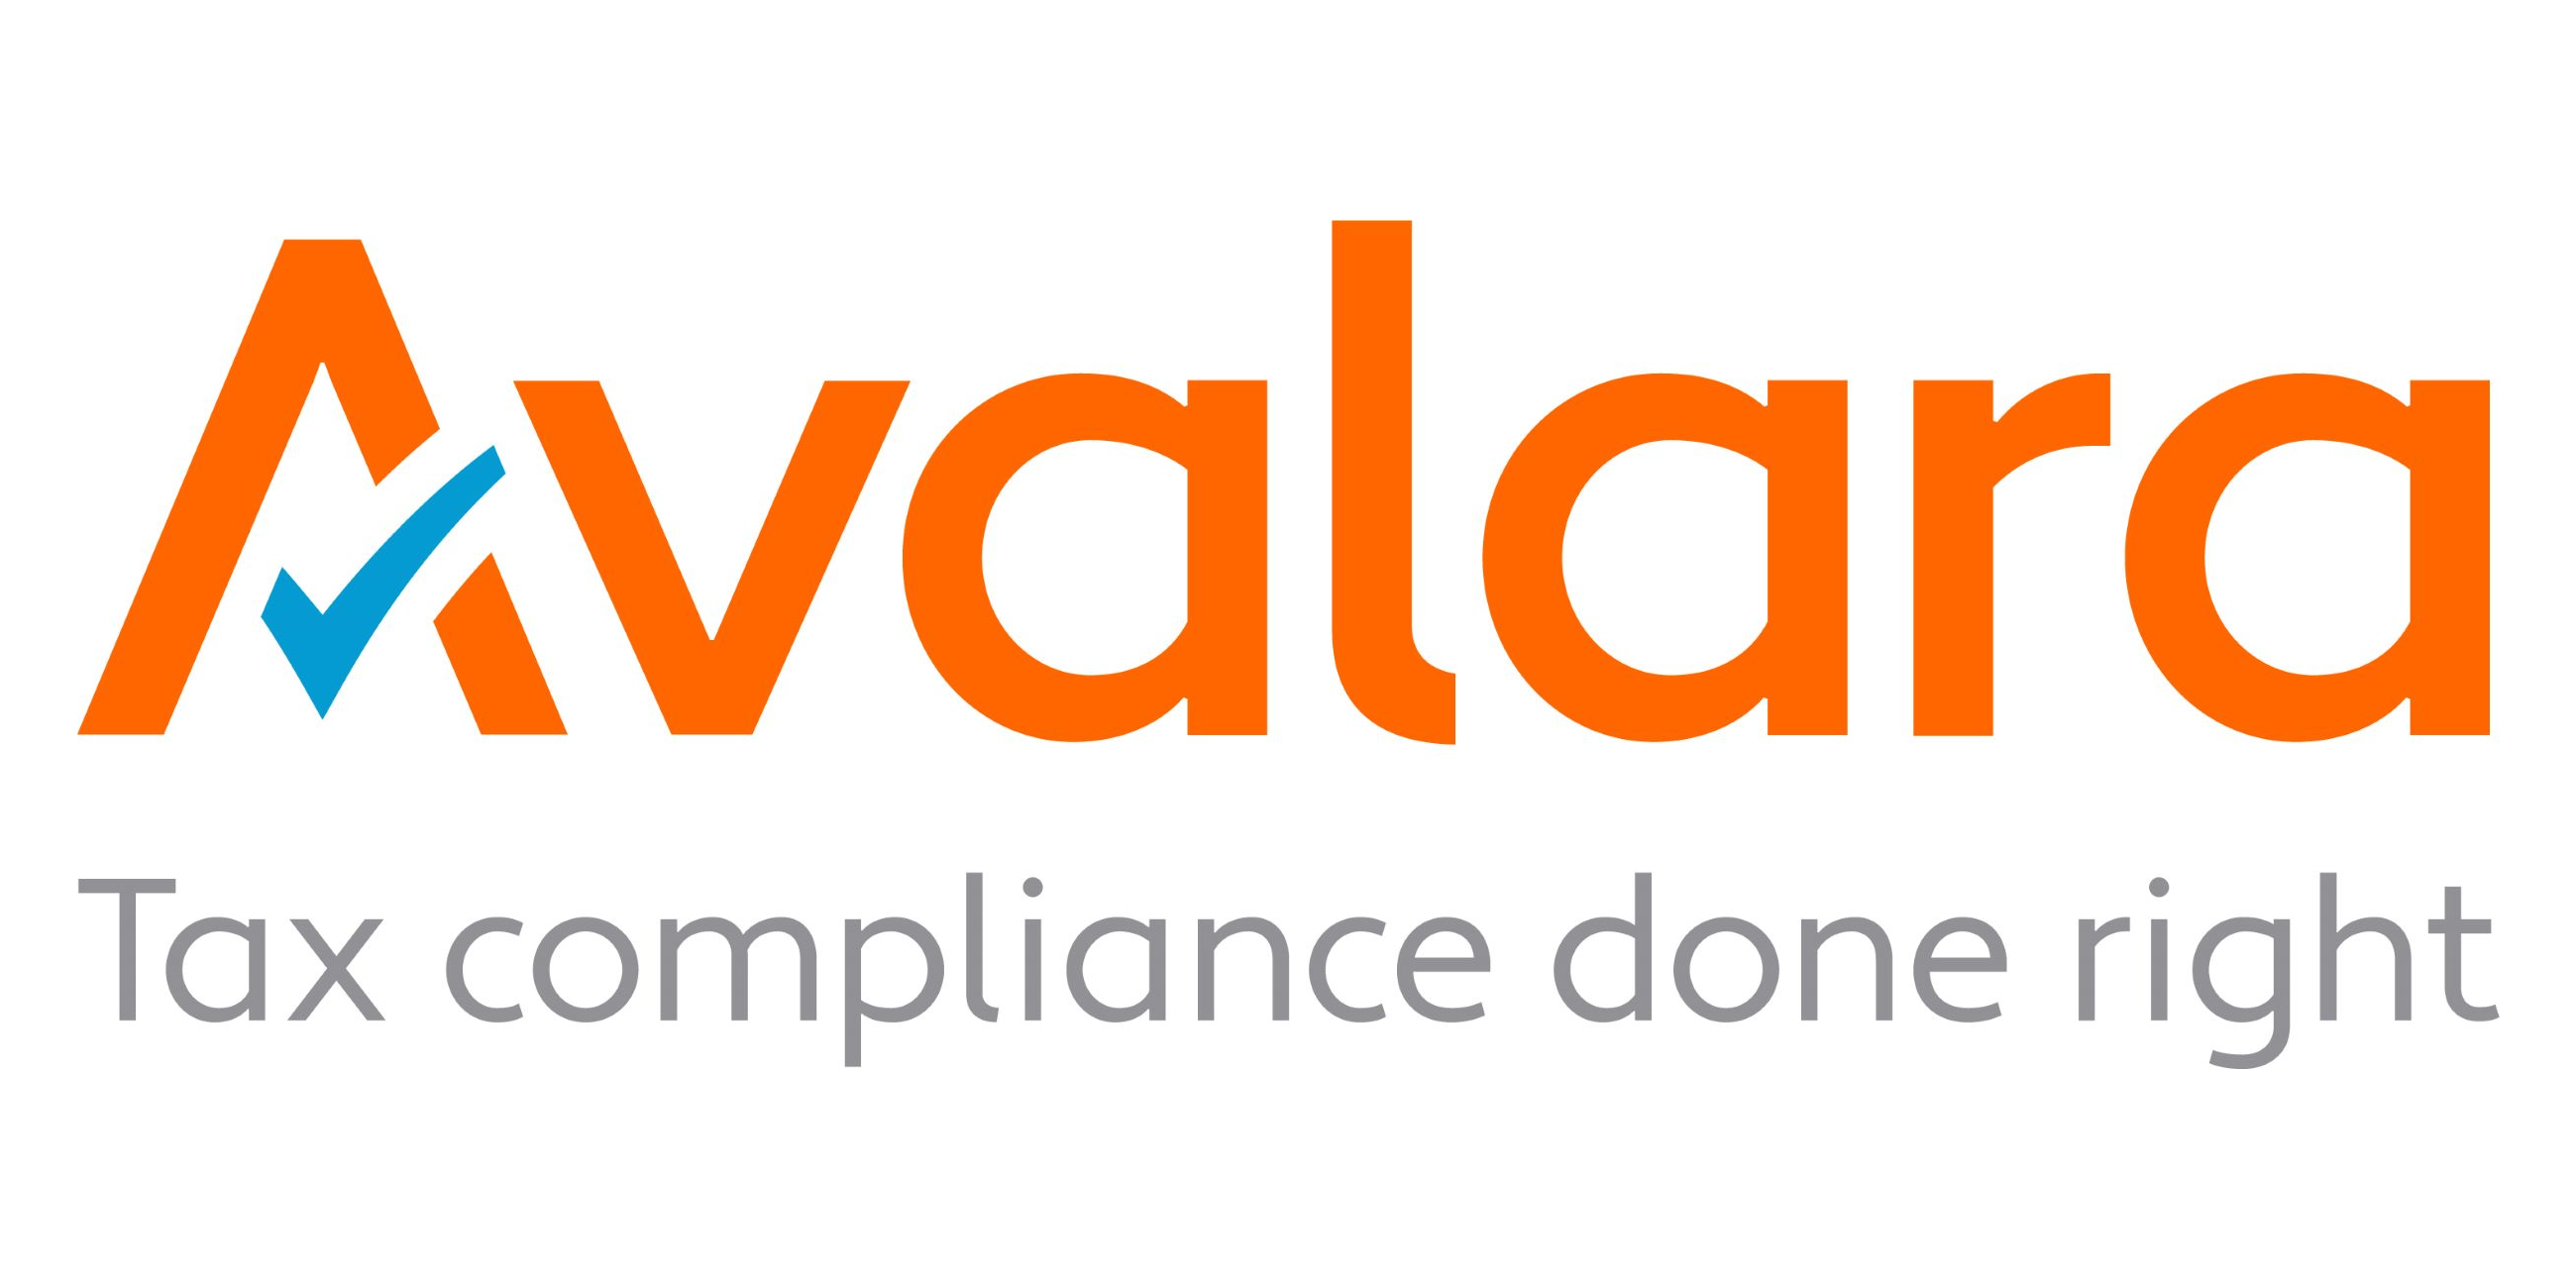 Avalara Announces 18 Newly Certified Integrations into Business Applications